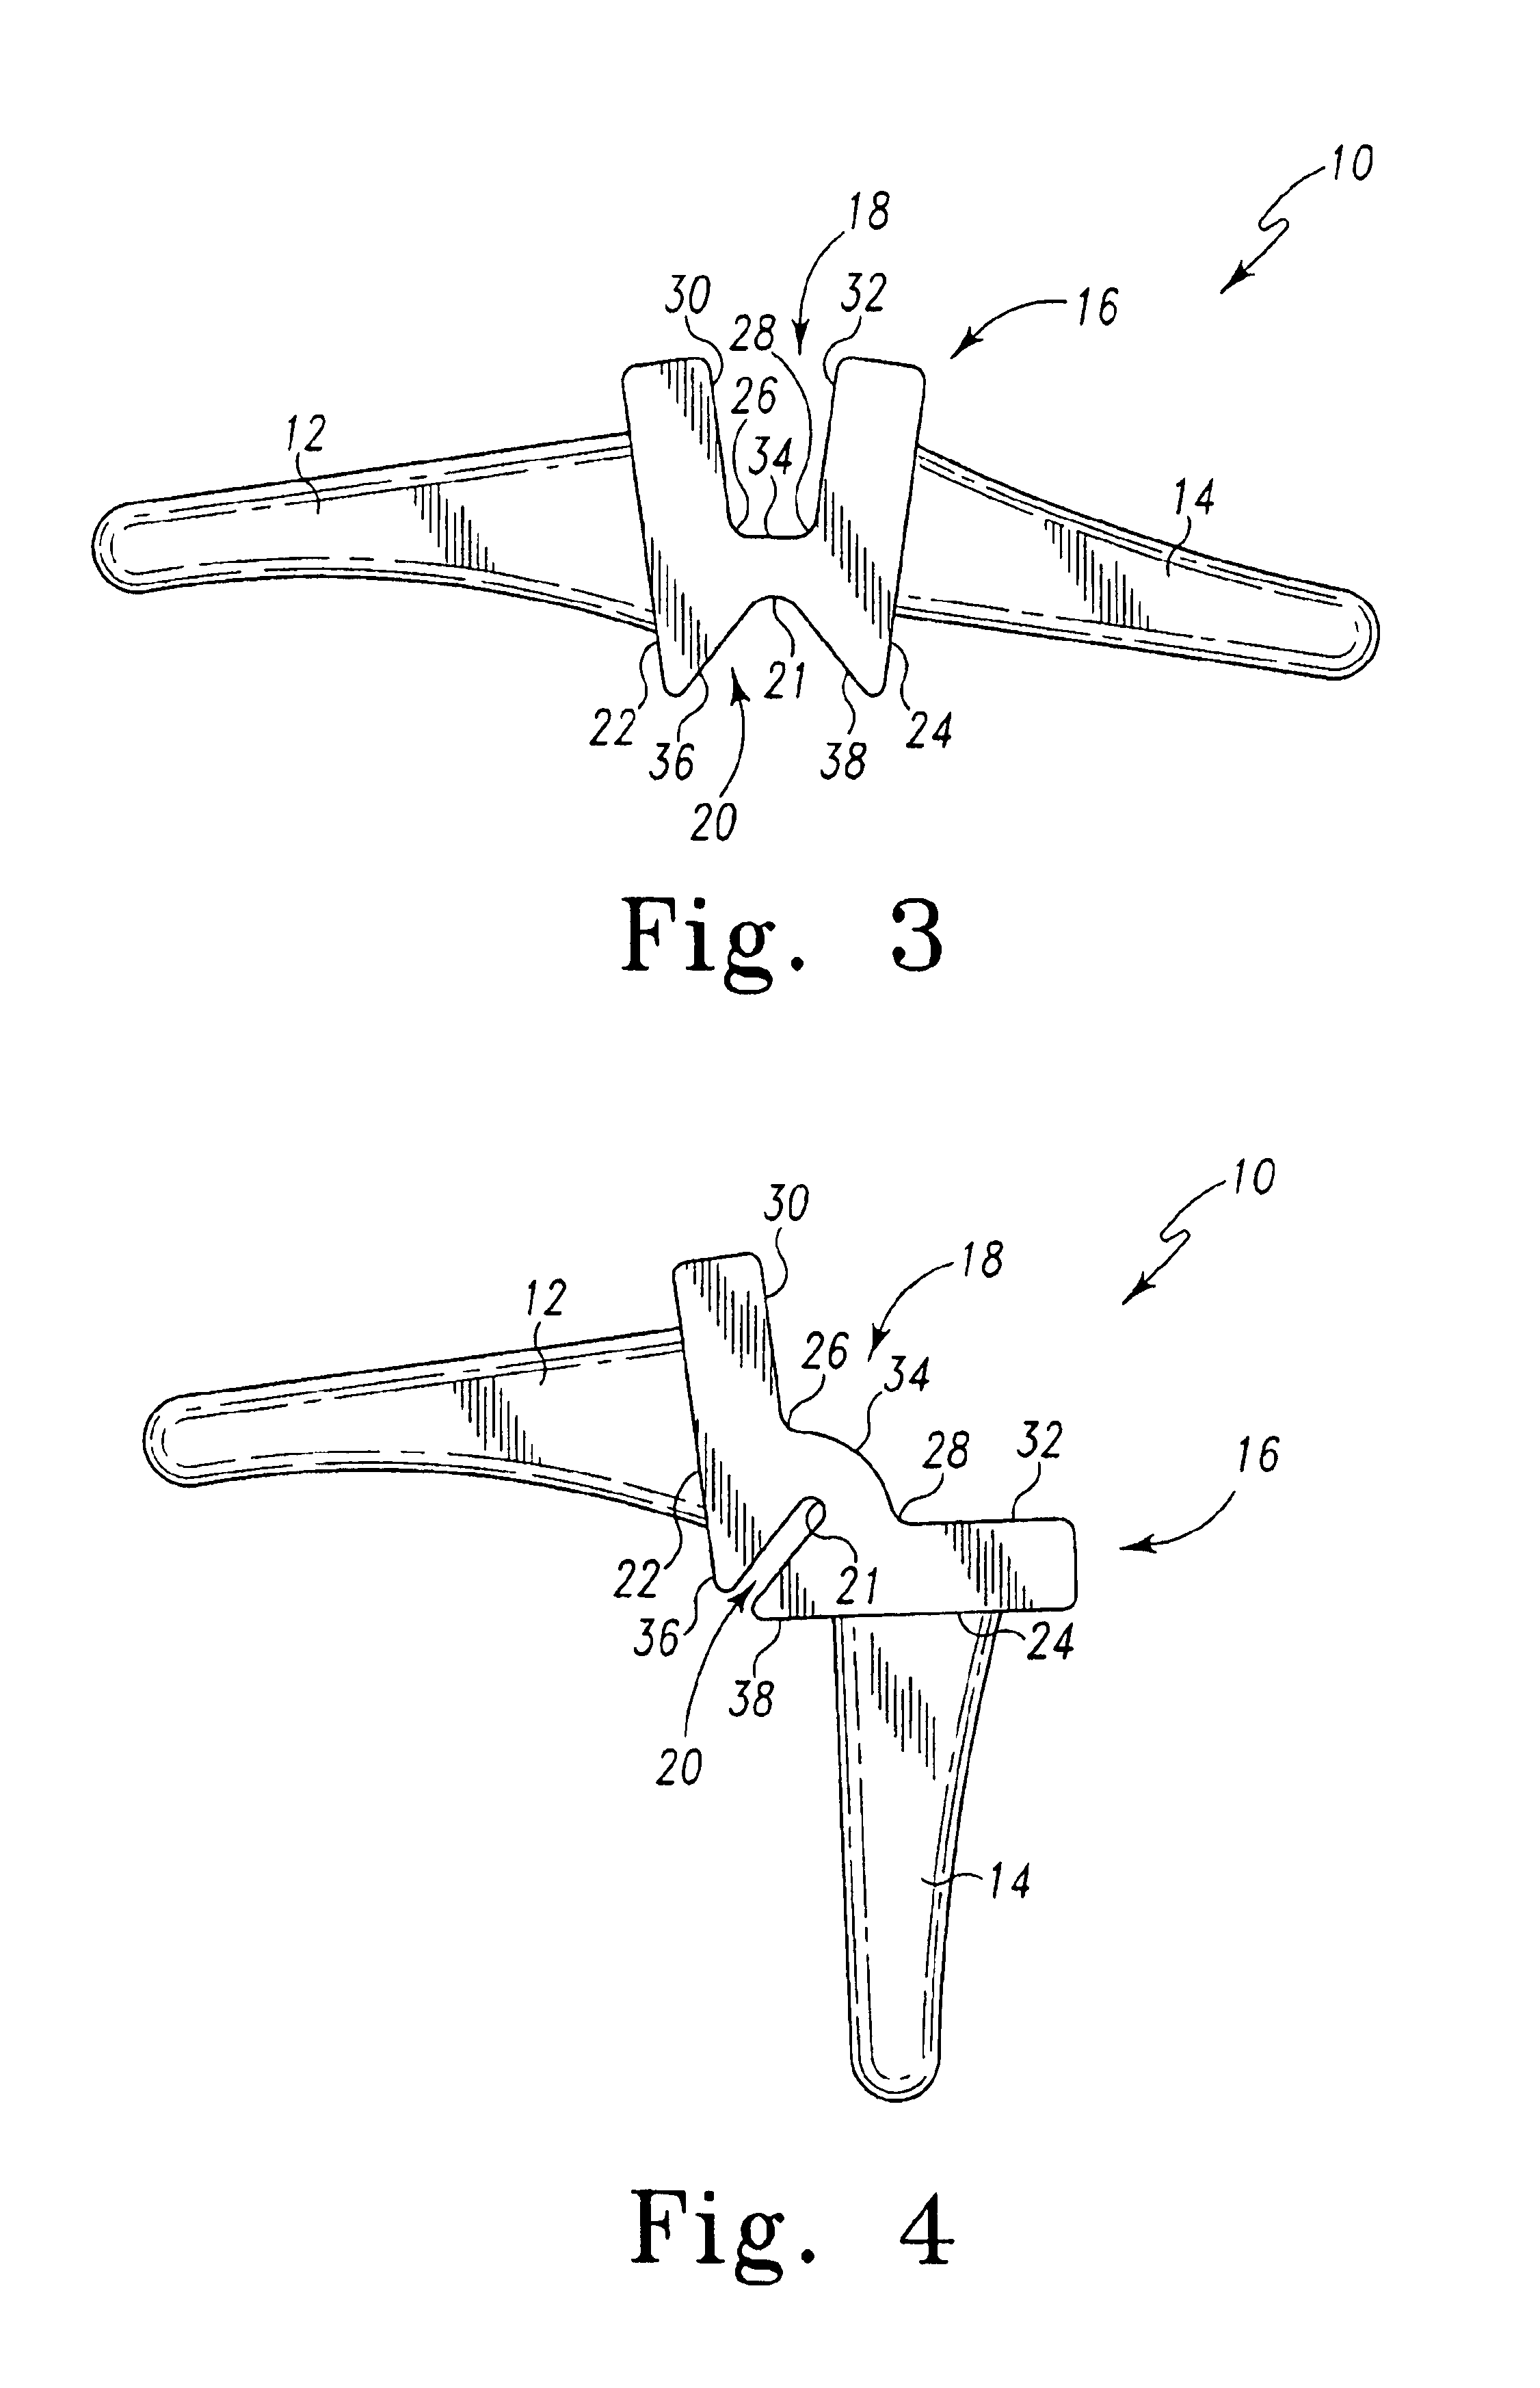 Prosthetic joint component having multiple arcuate bending portions